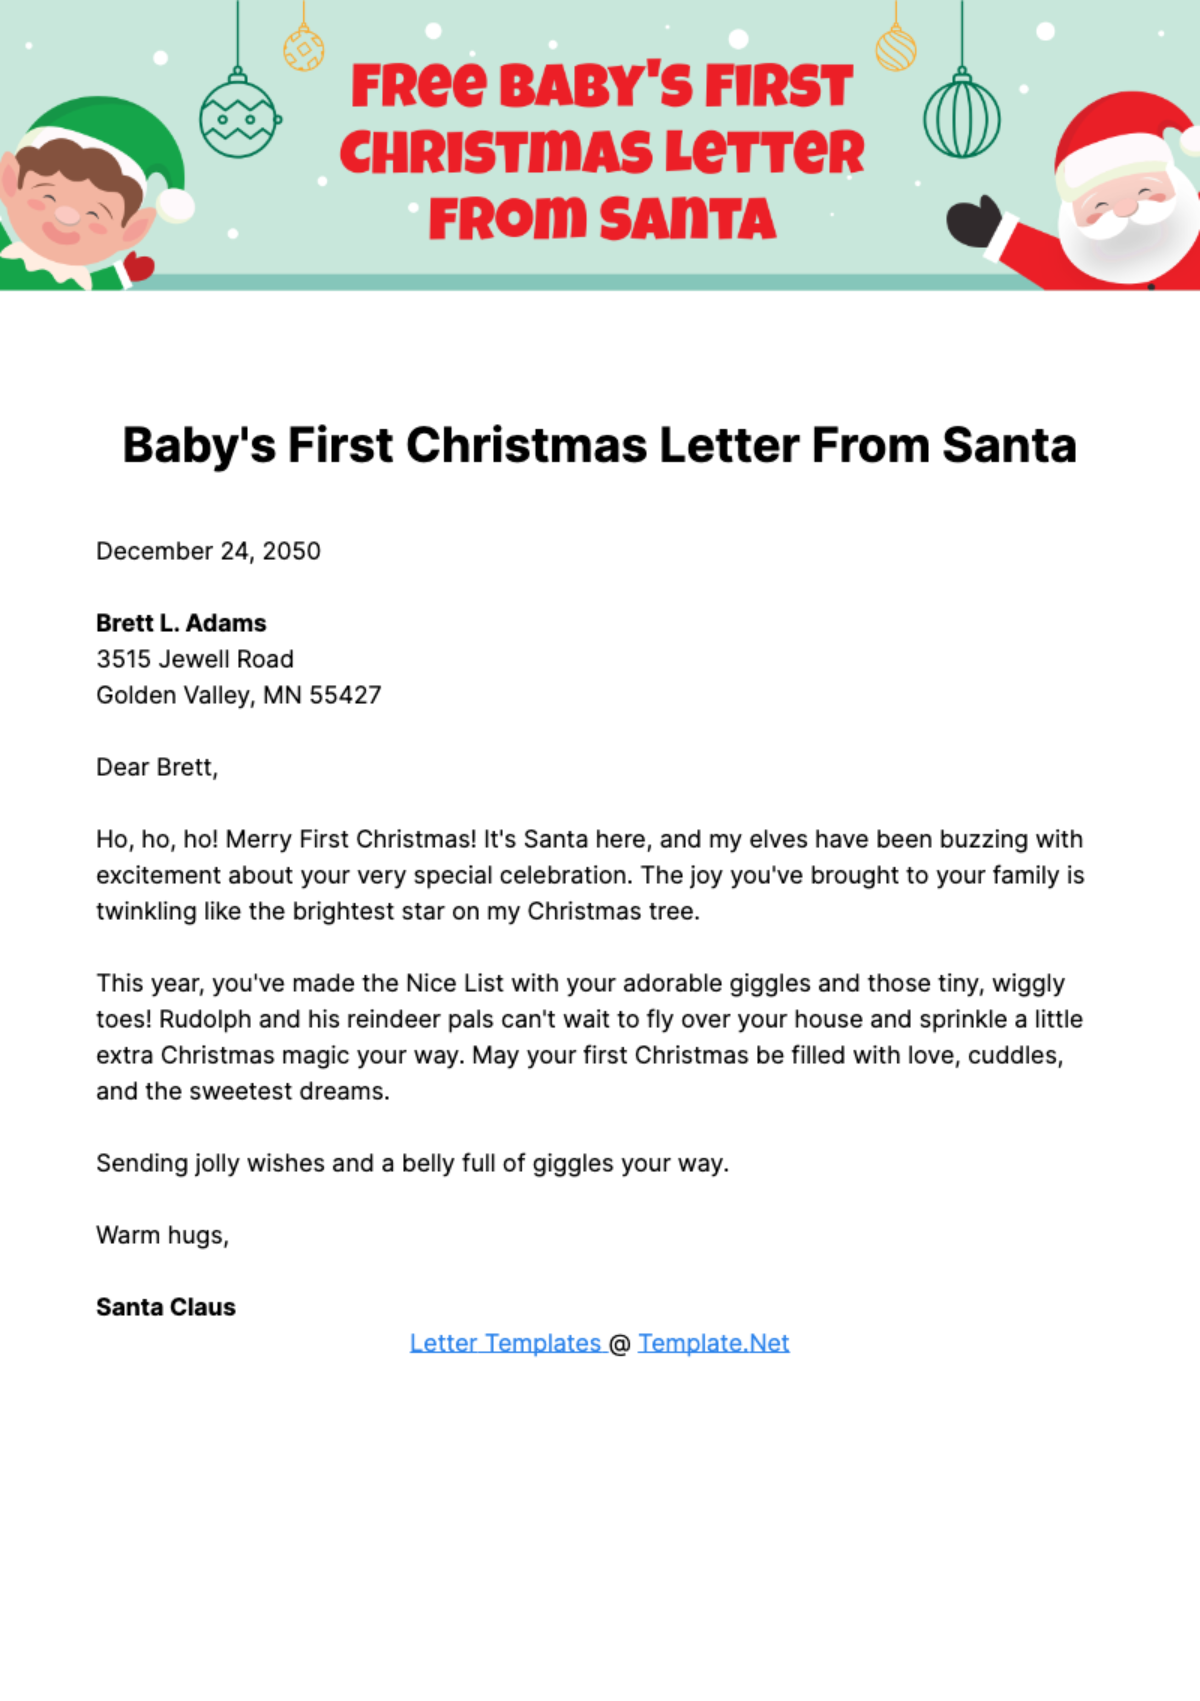 Free Baby's First Christmas Letter from Santa Template